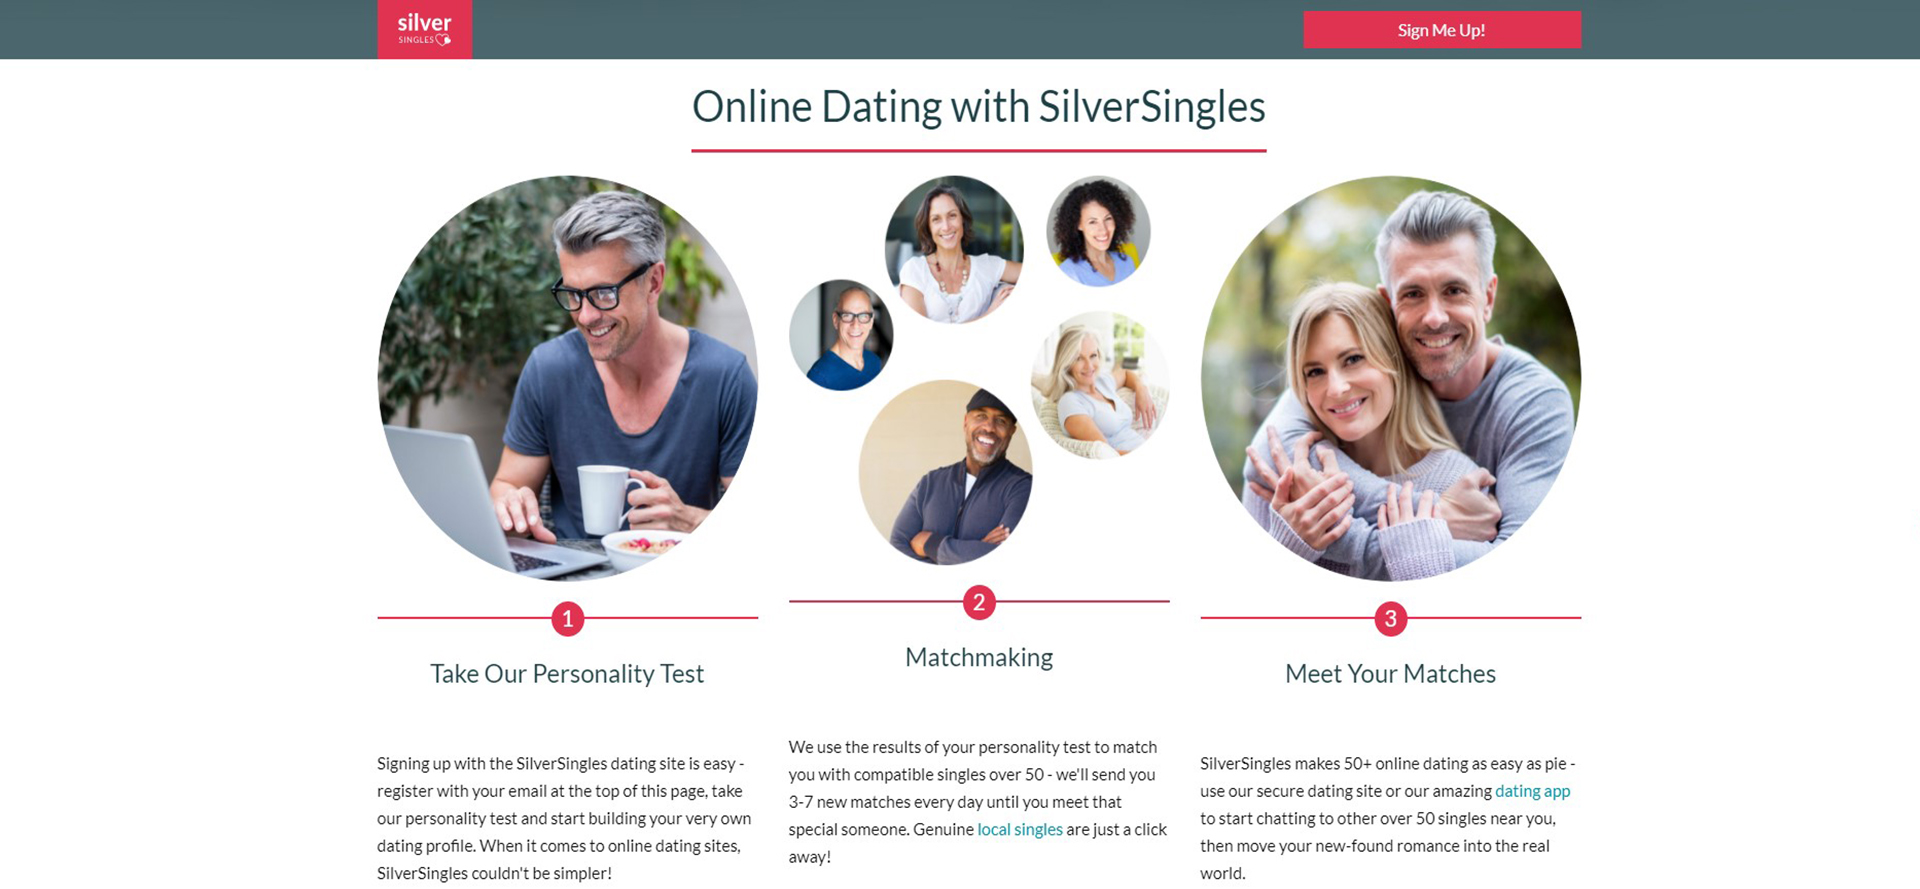 Most Popular Dating Sites For Over 50